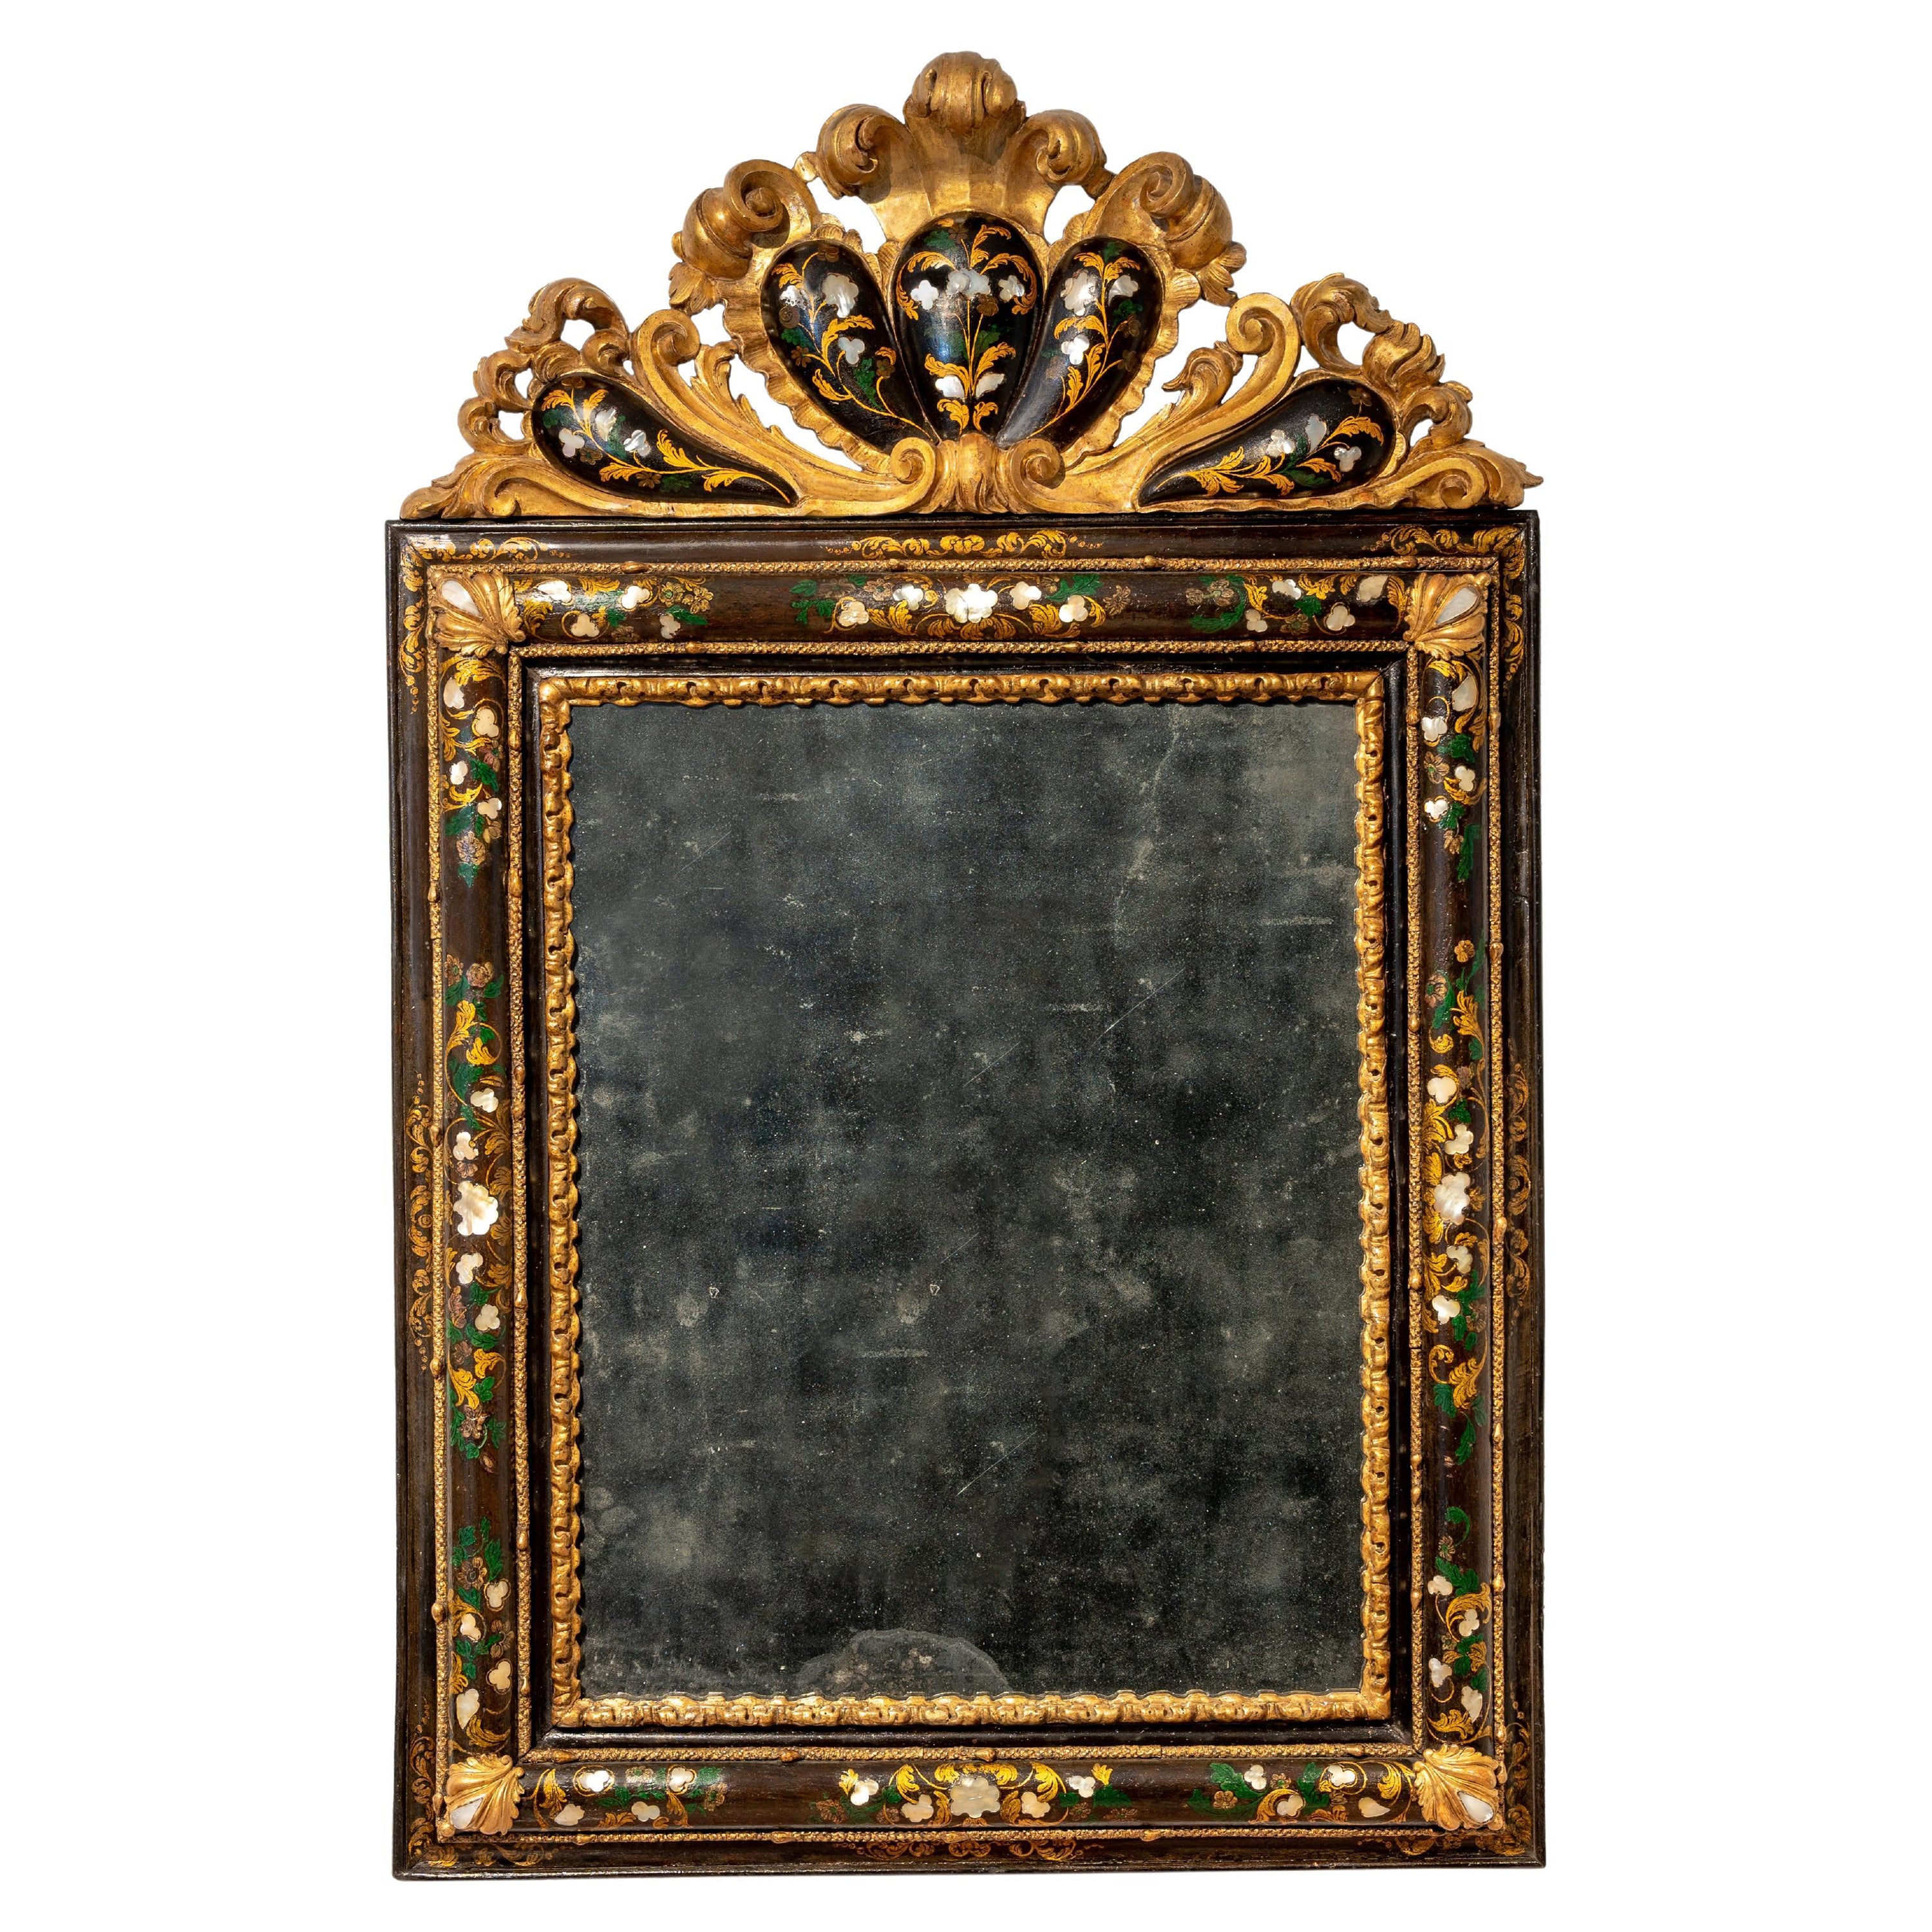 Eighteenth-century Venetian mirror in lacquered wood and with mother-of-pearl in